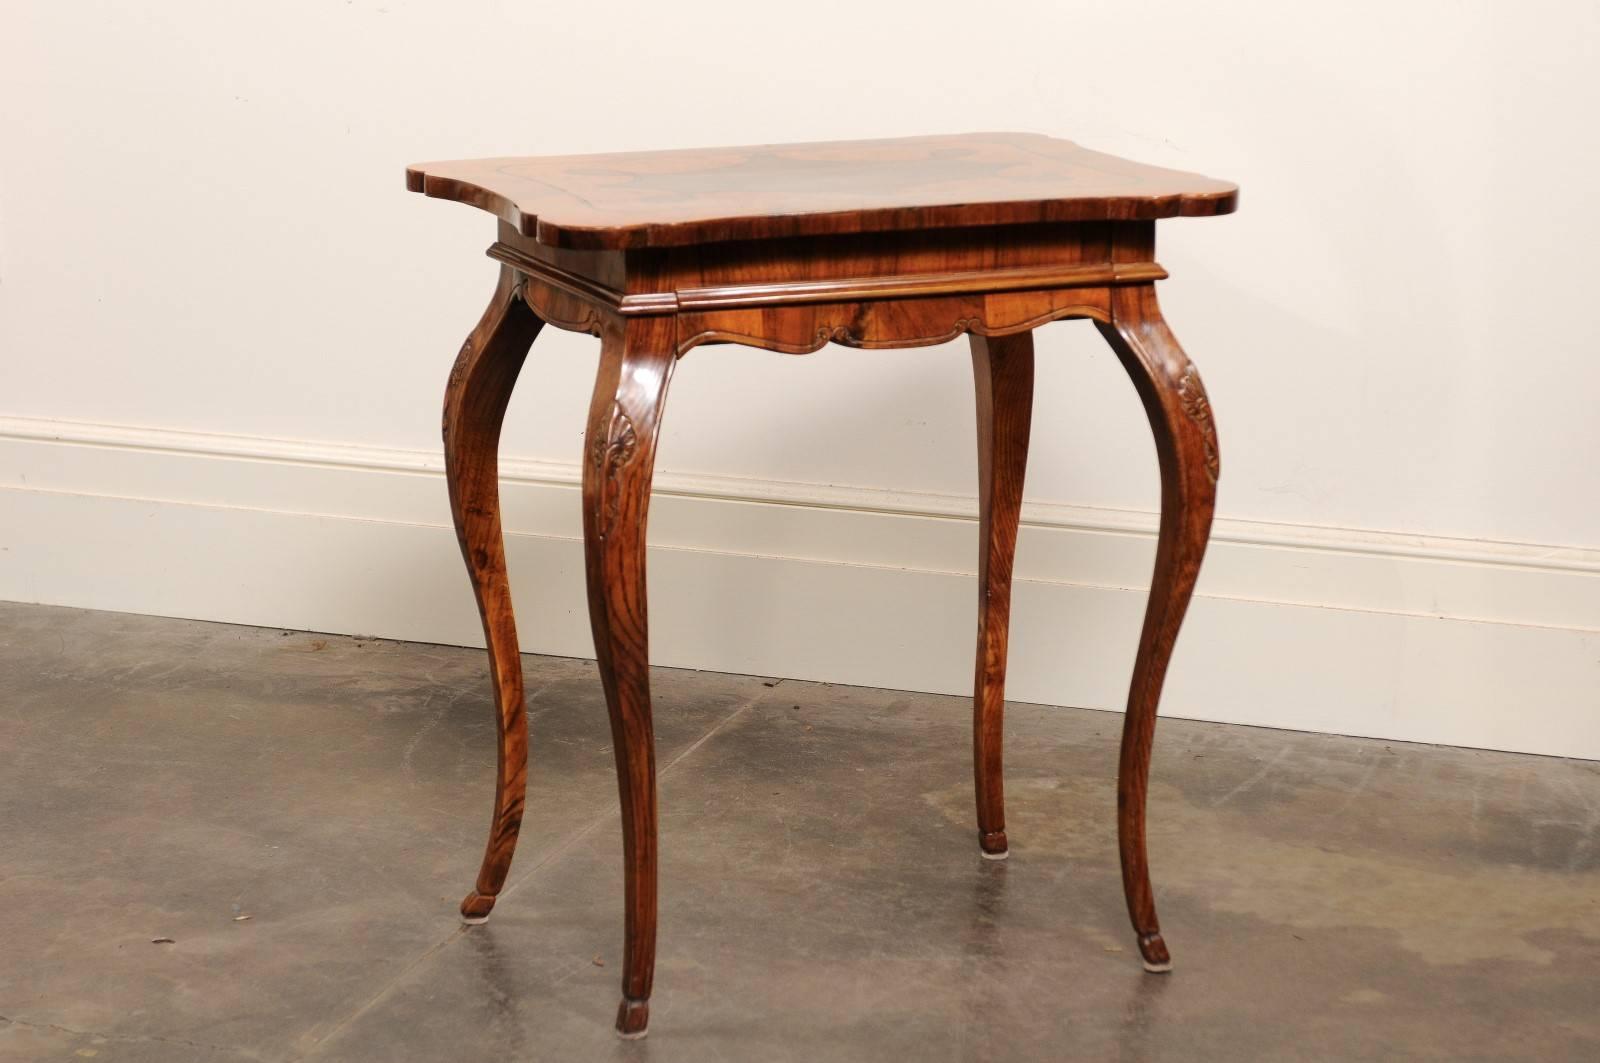 This spectacular Italian mid-19th century side table features an exquisite profiled and inlaid top with burl walnut over a carved apron. This apron is adorned in its center with a molding that camouflages the single drawer and gives perfect harmony